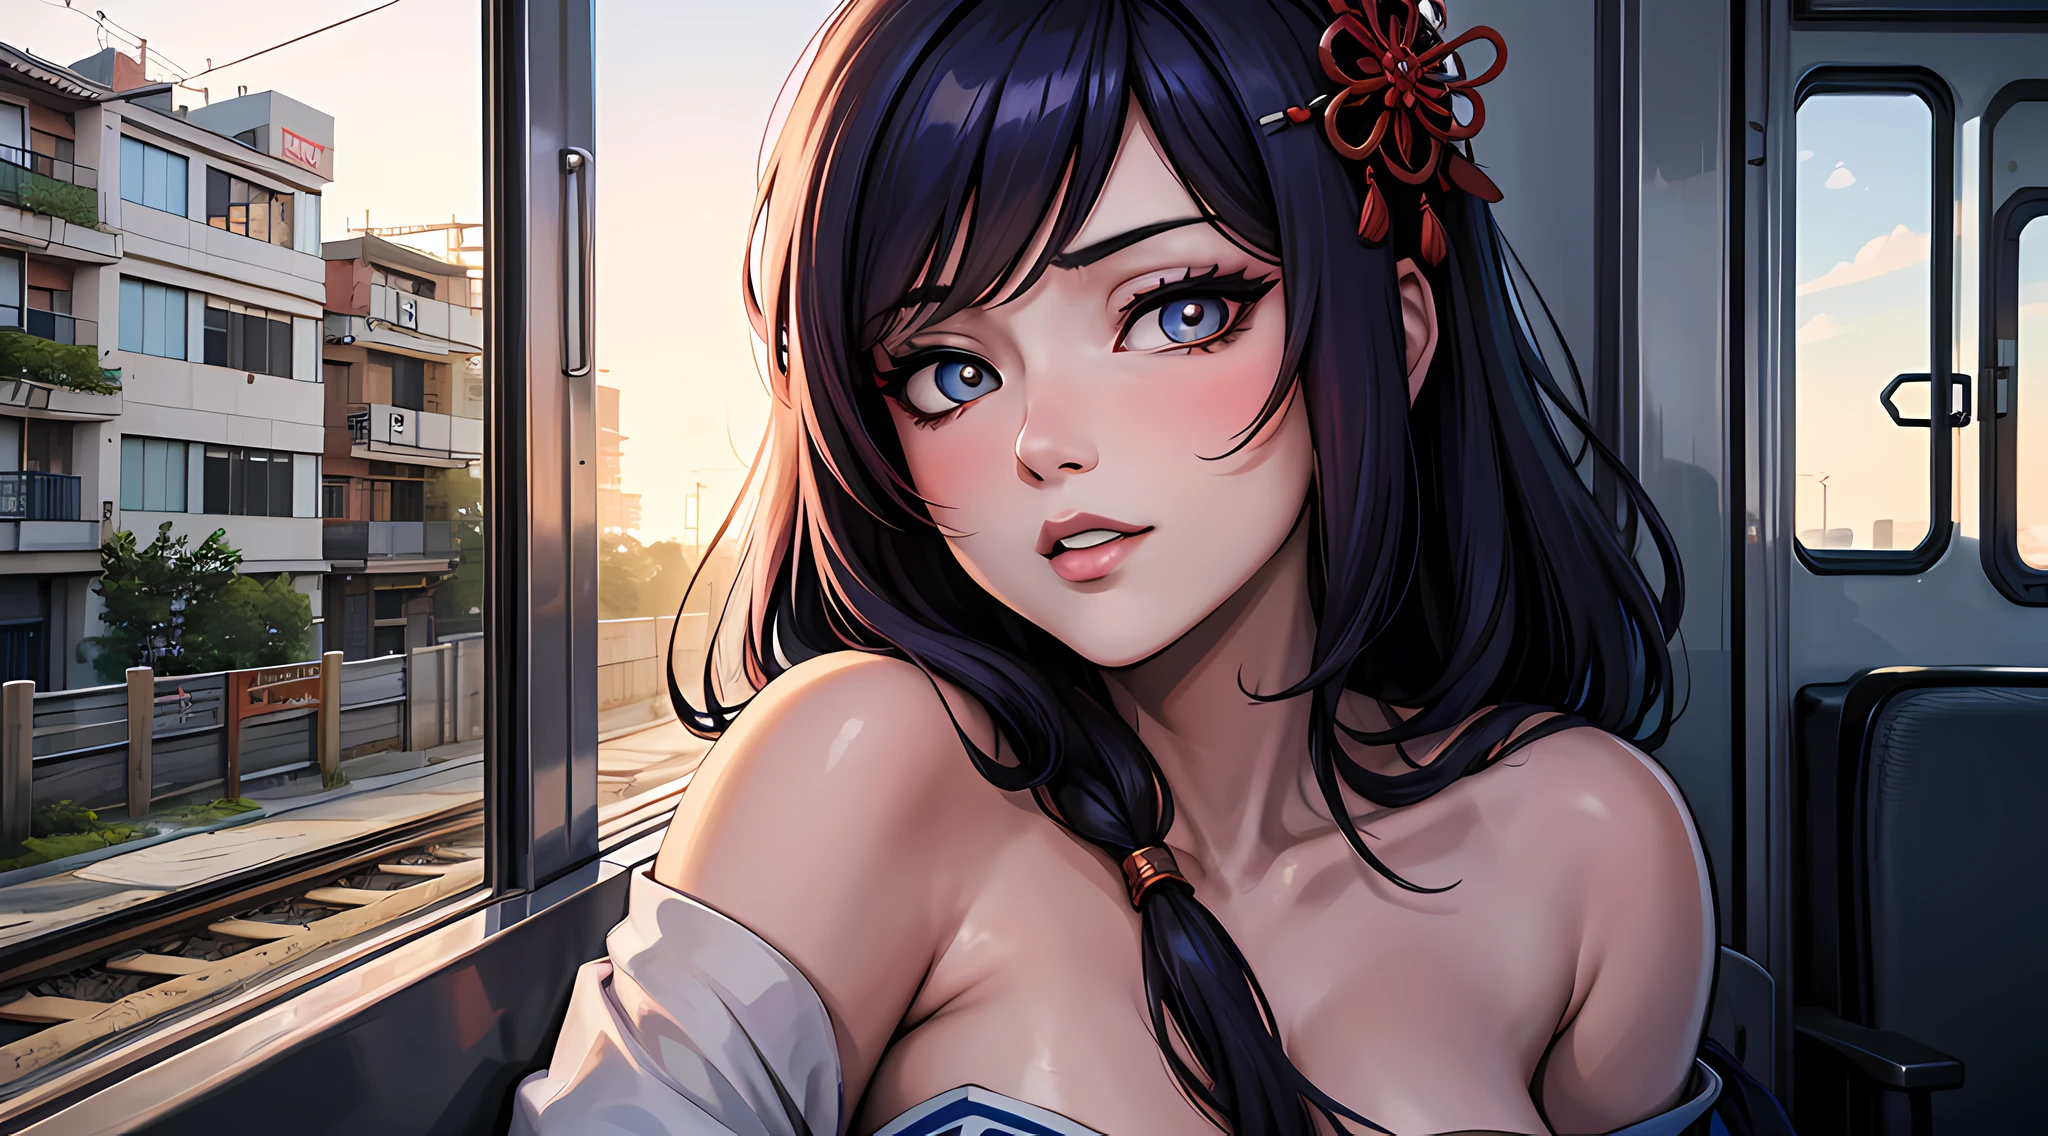 Asian woman, hair with colored highlights, sitting in a train carriage, travel by train, lights reflected in hair , bright and penetrating colored eyes, window to the city, hair fluttering in the wind, facefocus, zoom in on face, alone, influenced by Japanese culture and aesthetics, atmosfera tranquila, ultra detailed eyes, Masterpiece artwork, nblurry background, 8k.